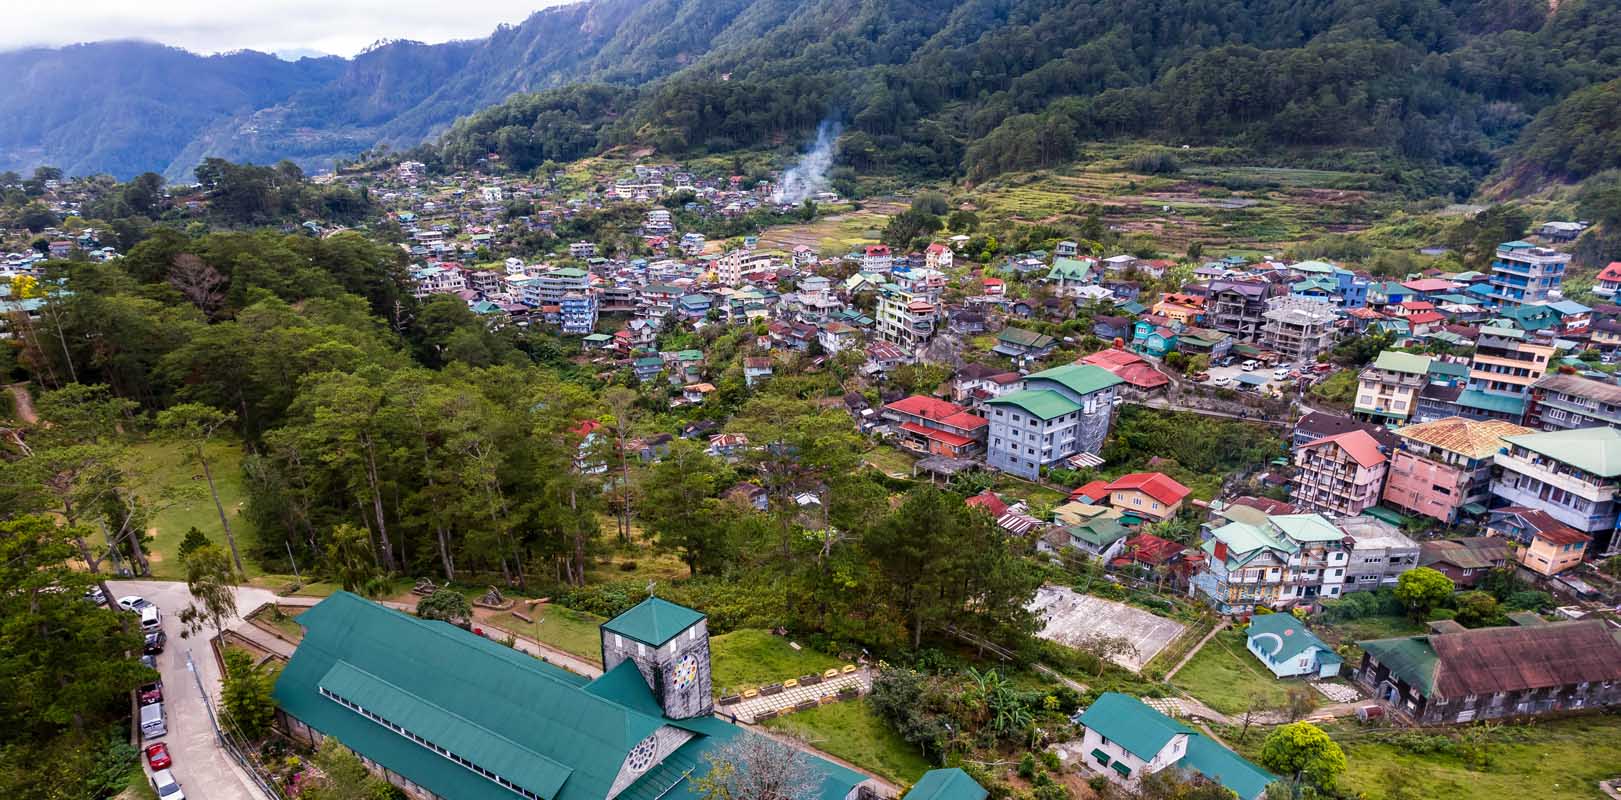 Cold places in the Philippines - Sagada 